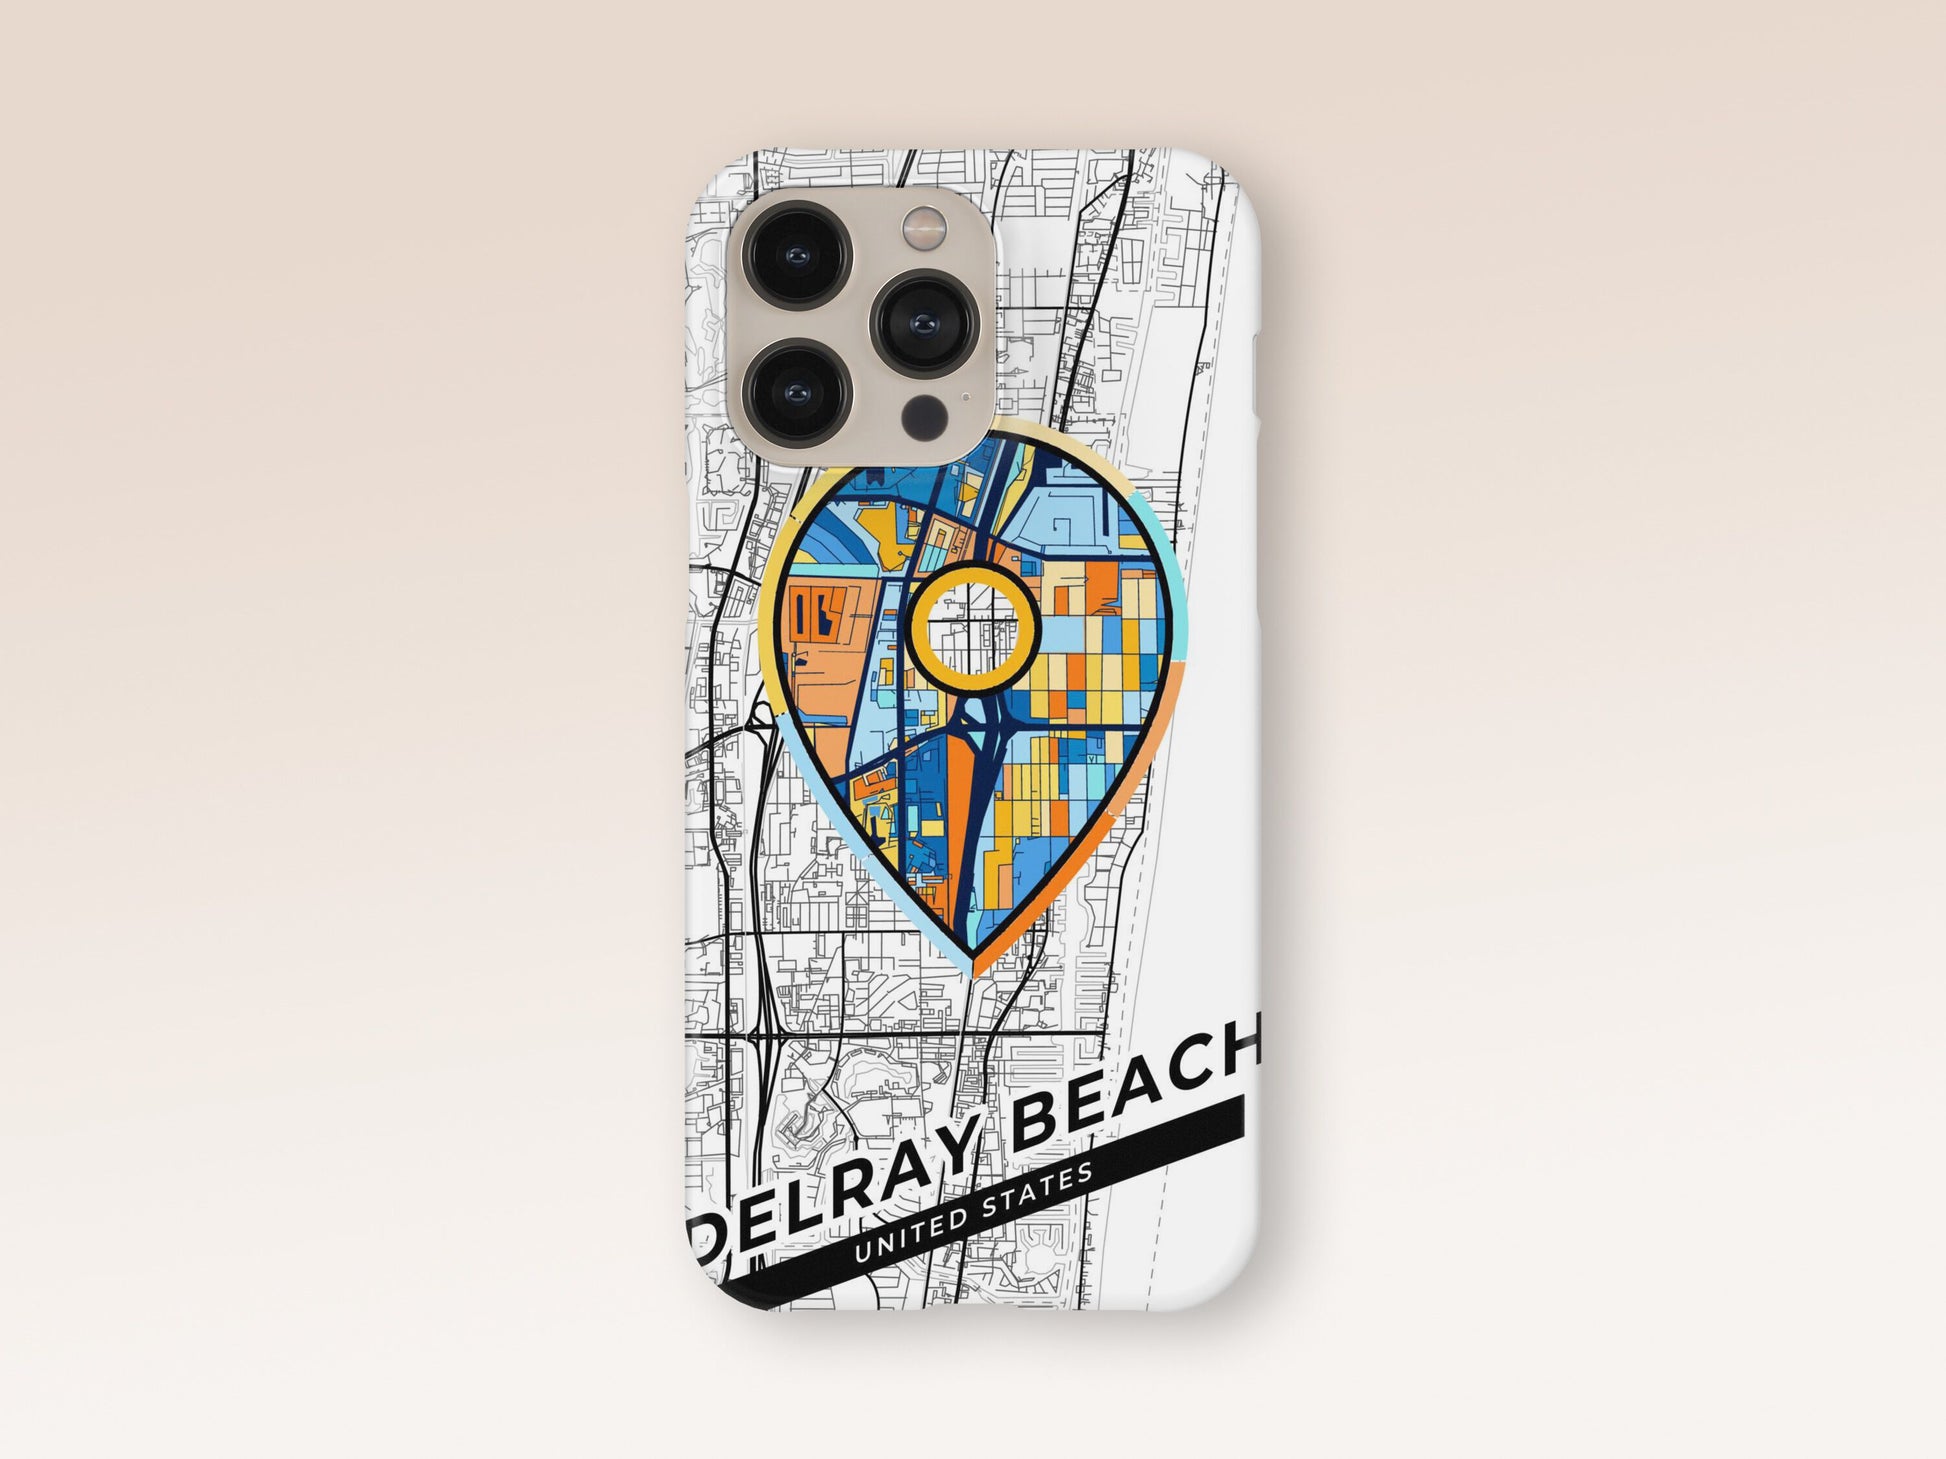 Delray Beach Florida slim phone case with colorful icon. Birthday, wedding or housewarming gift. Couple match cases. 1